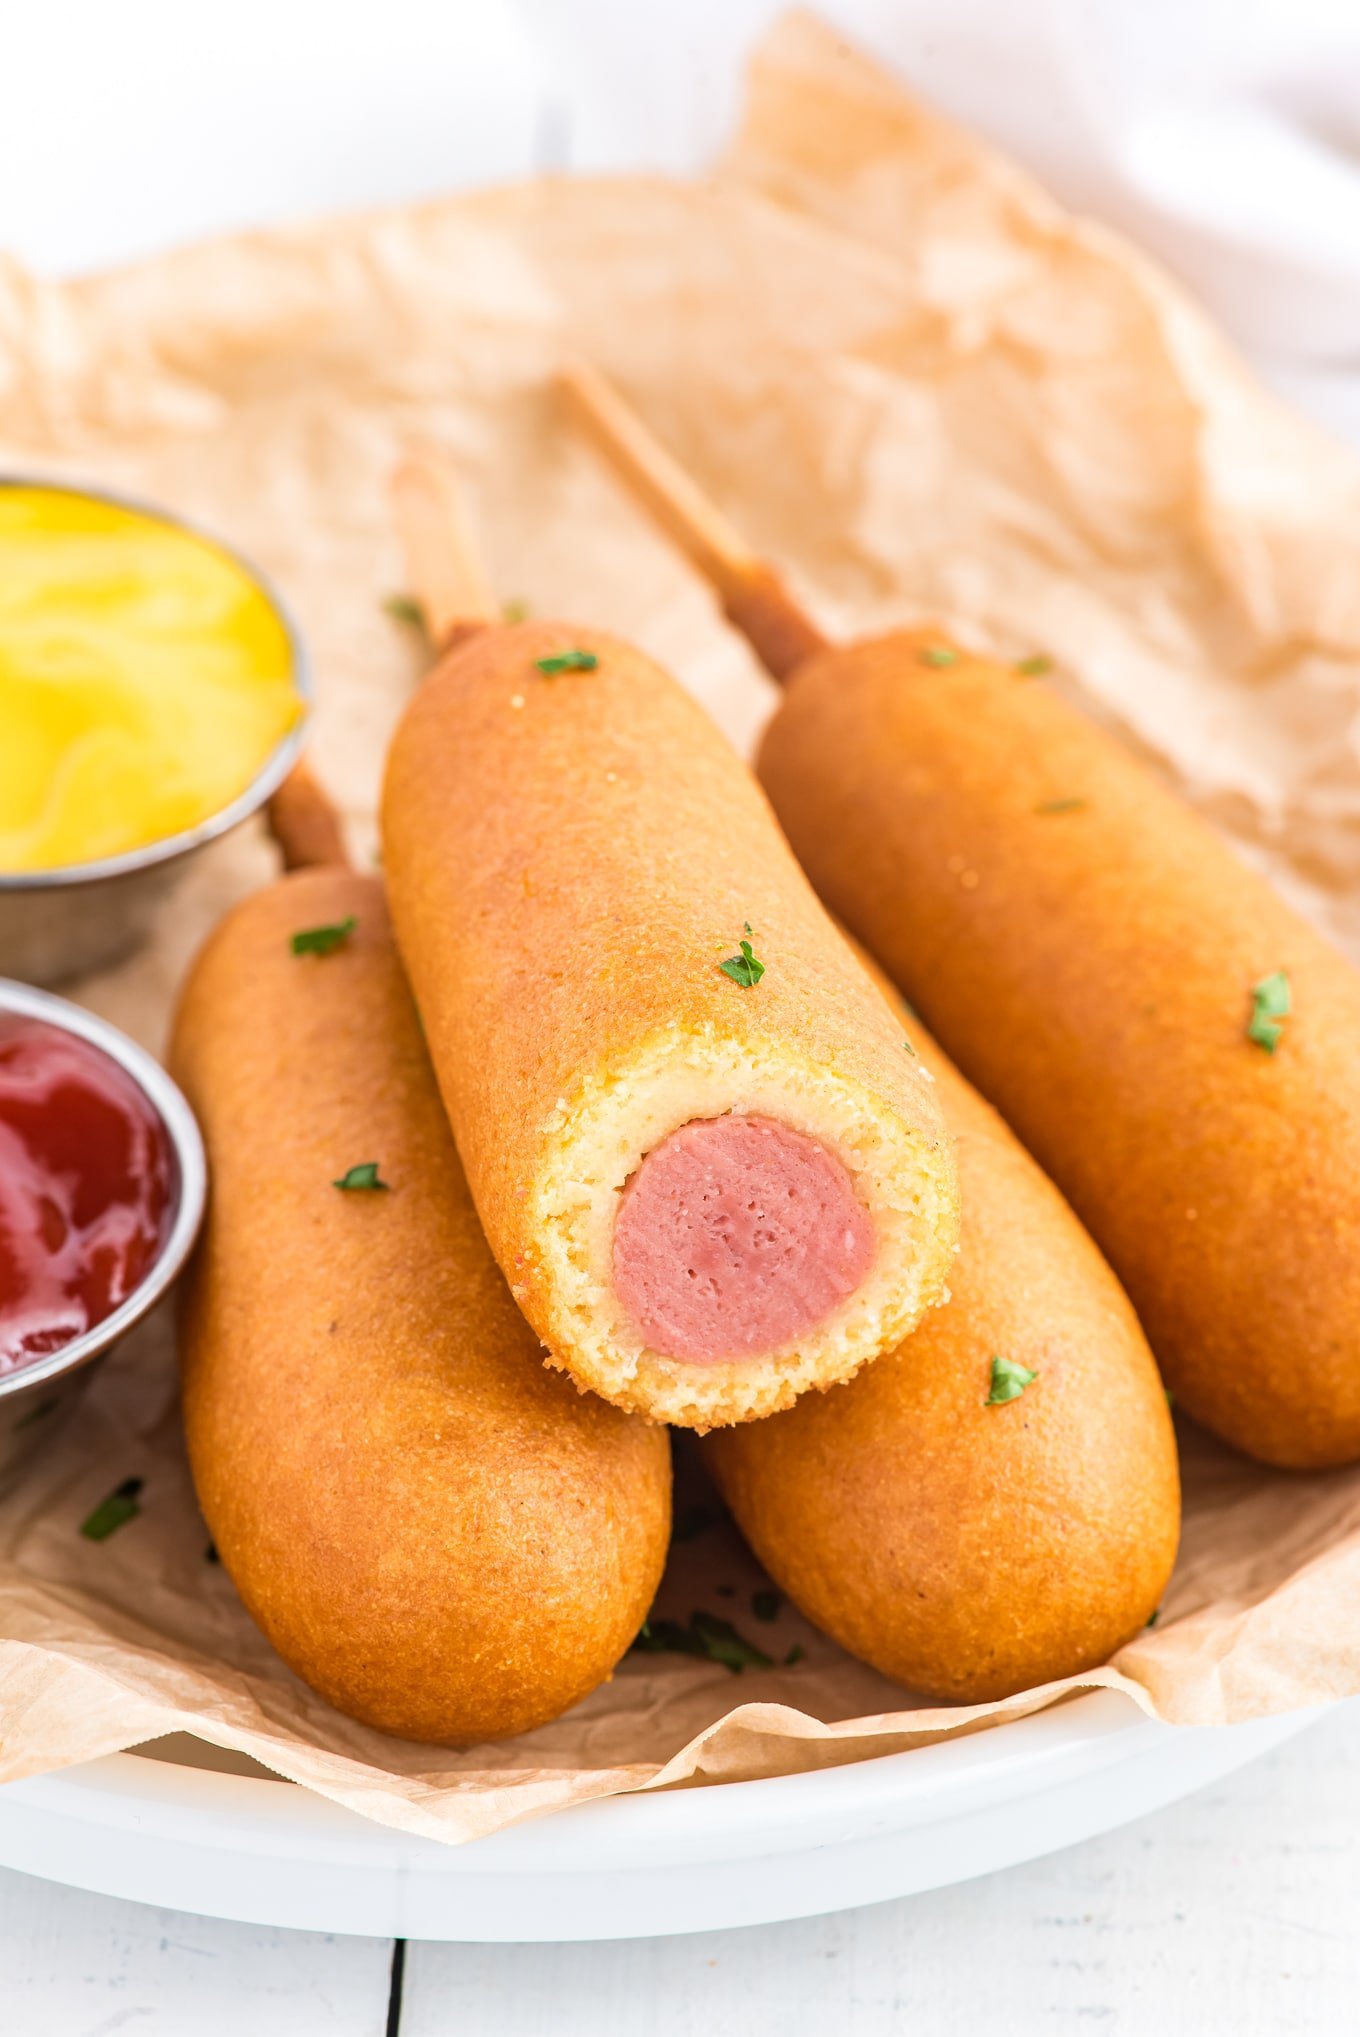 A close-up photo of four corn dogs on a plate.